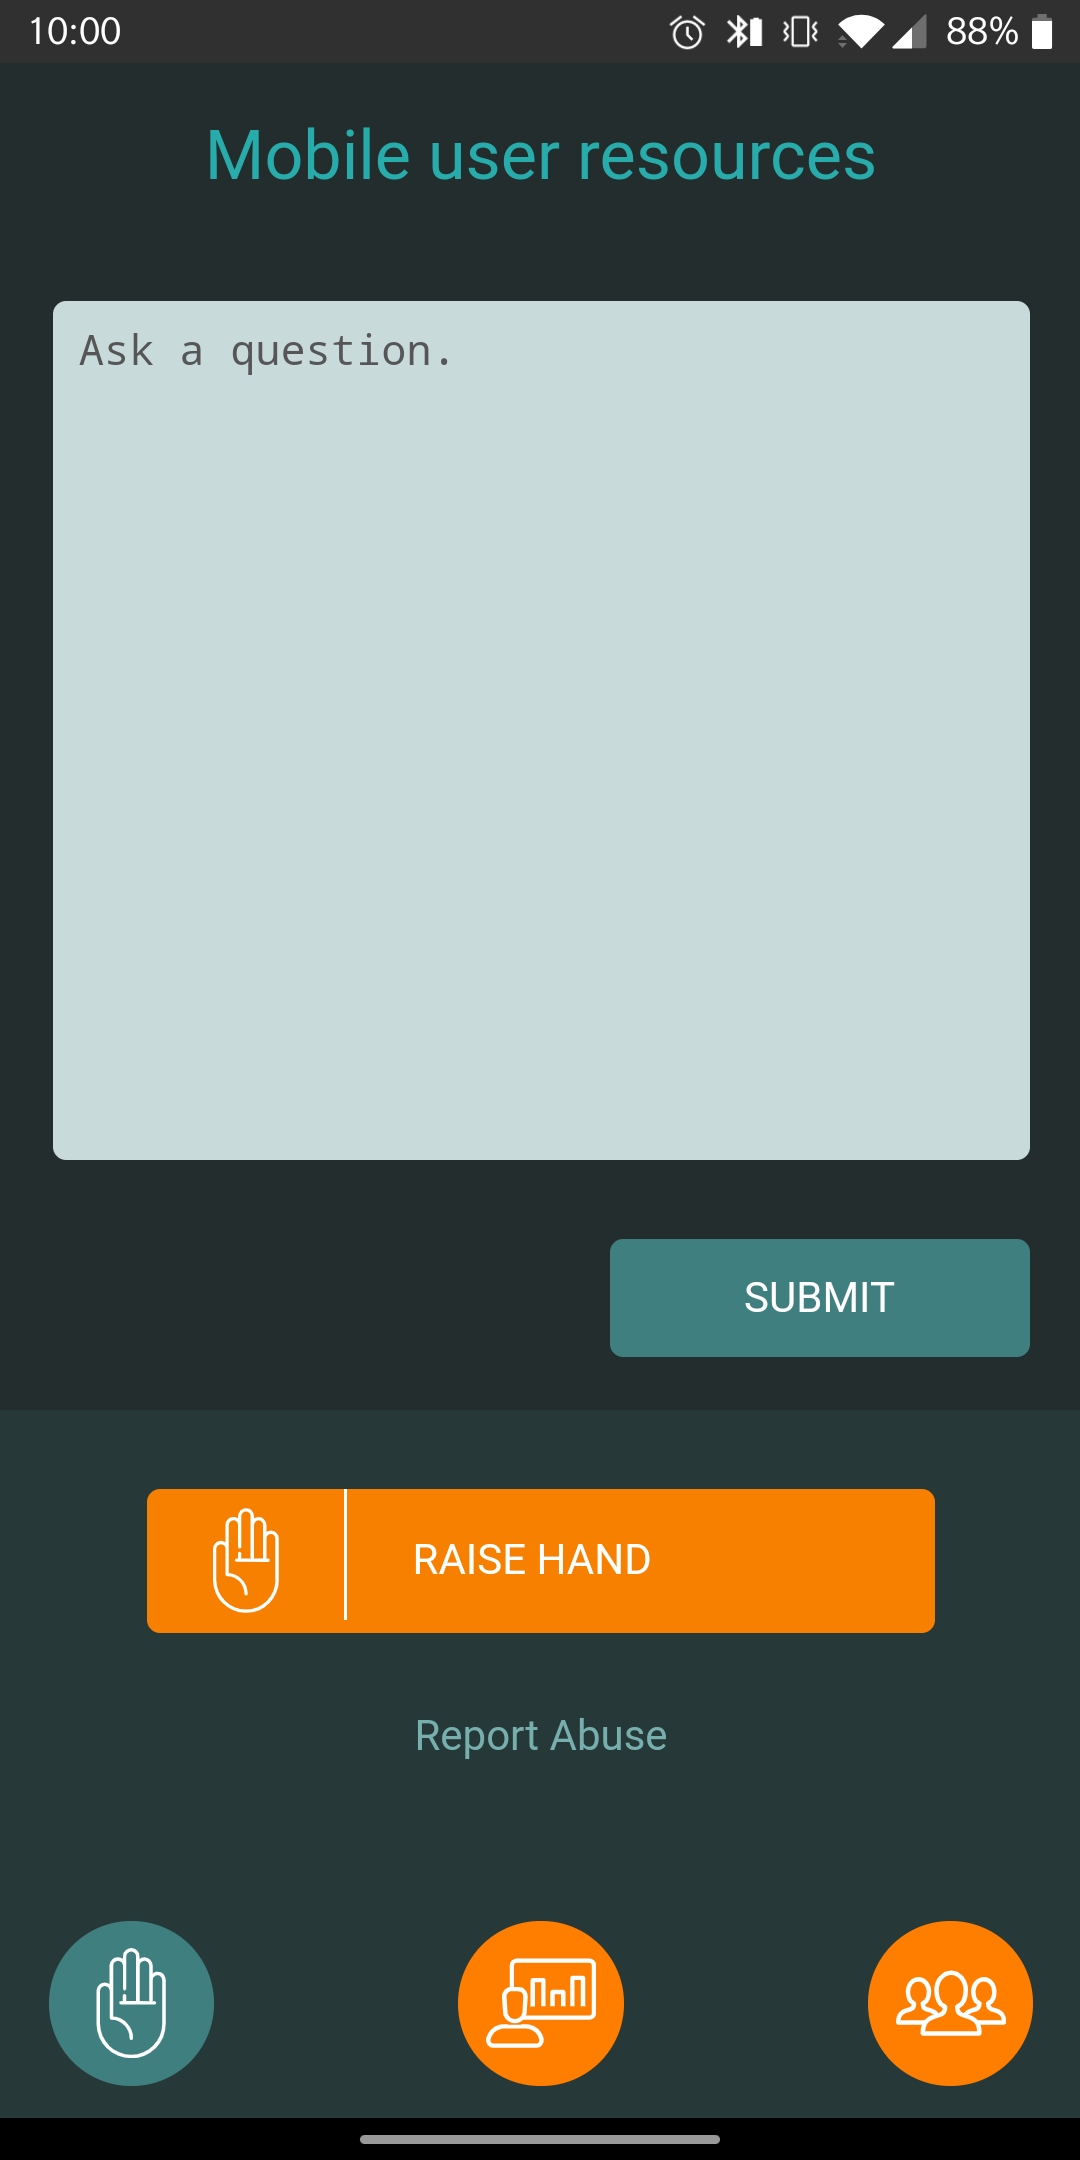 _ask_question_and_raise_hand_screen